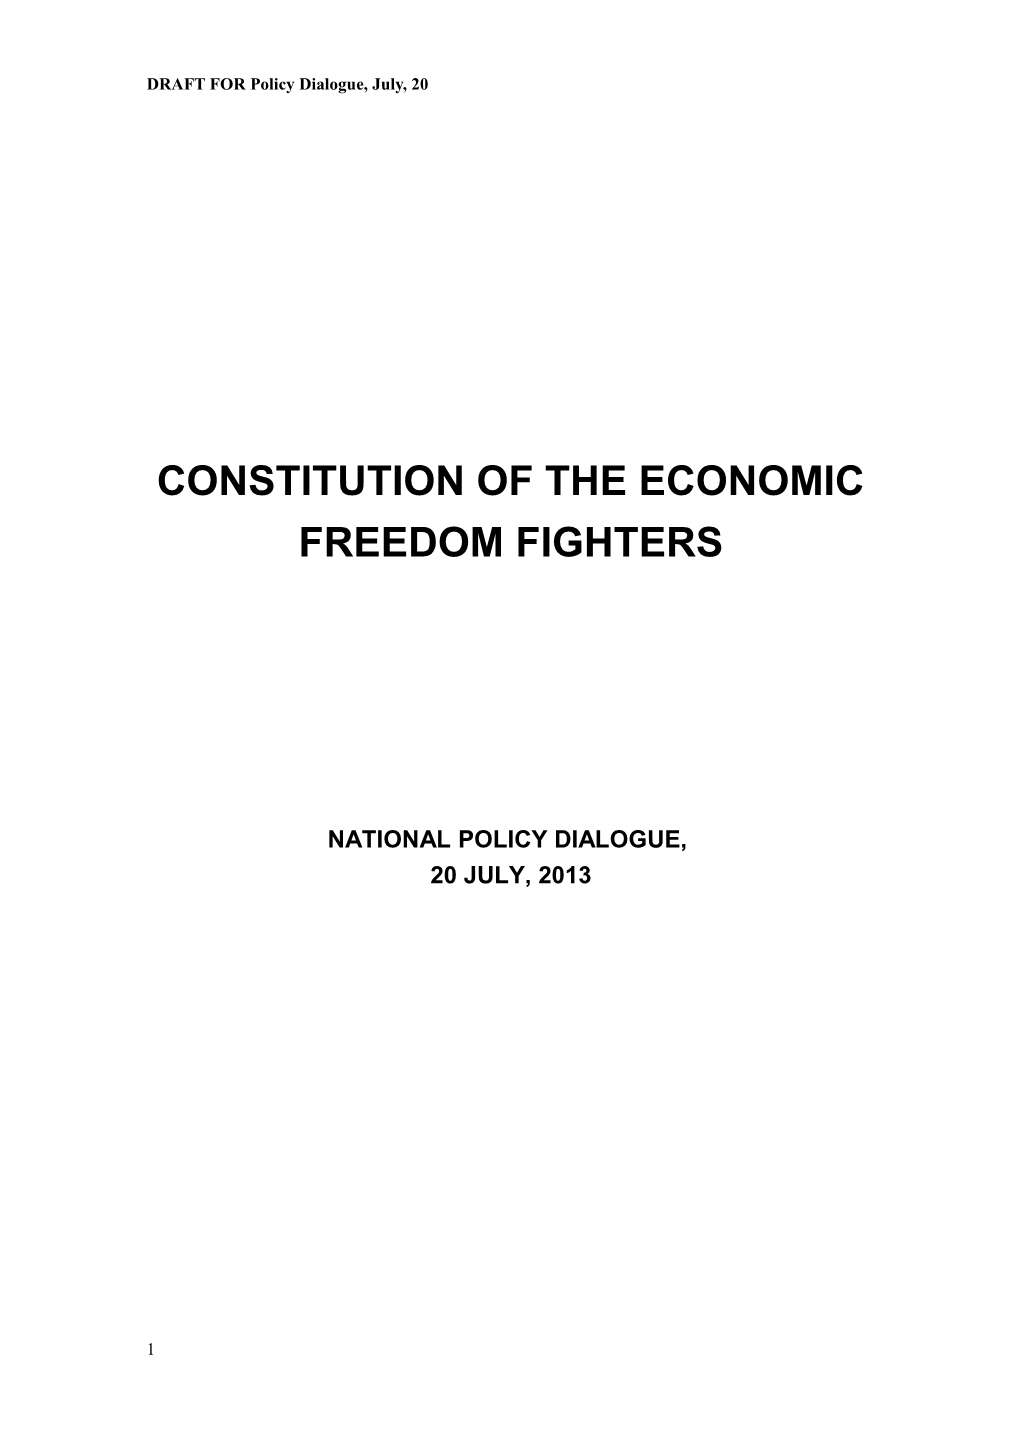 Constitution of the Economic Freedom Fighters